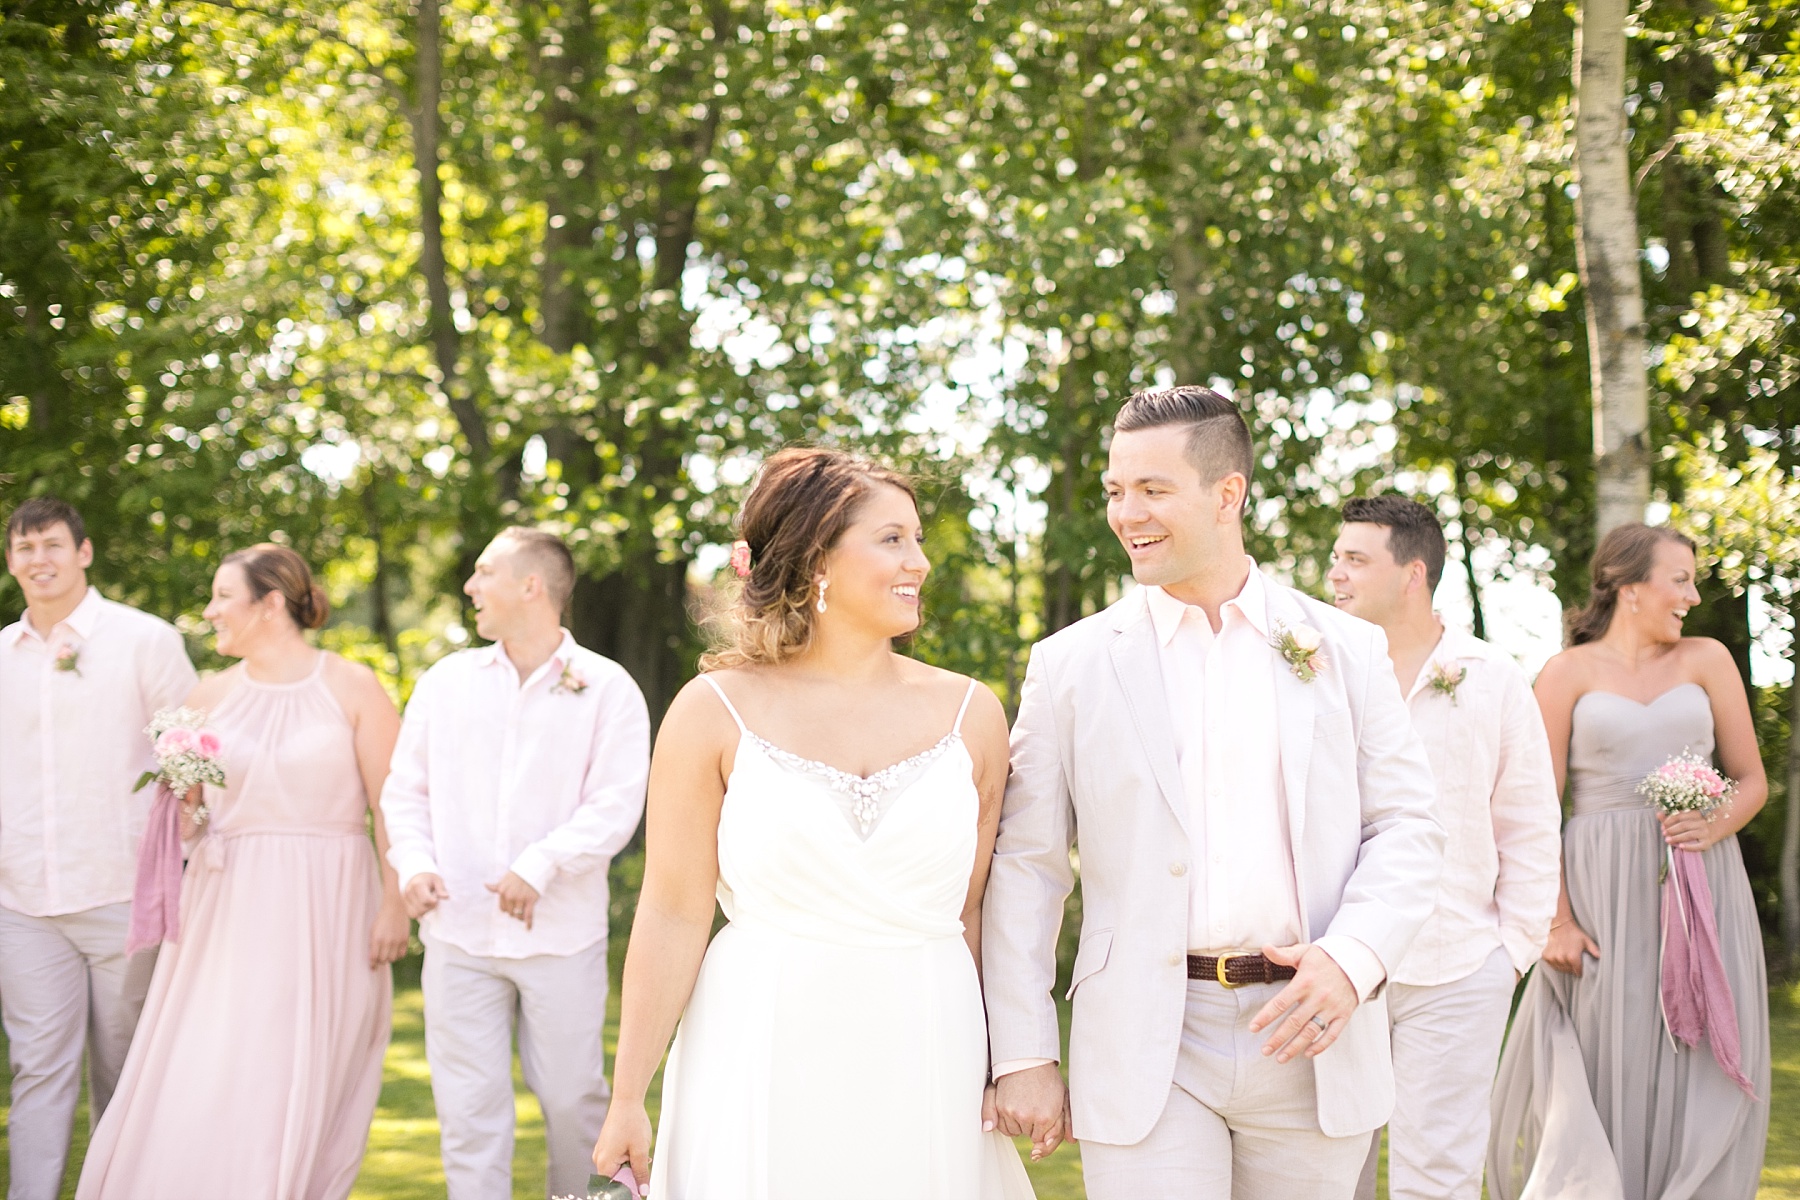 Married in the Virigin Islands, Alaina and Jacob greeted their guests and danced the night away at The Barn on Stoney Hill for their reception.